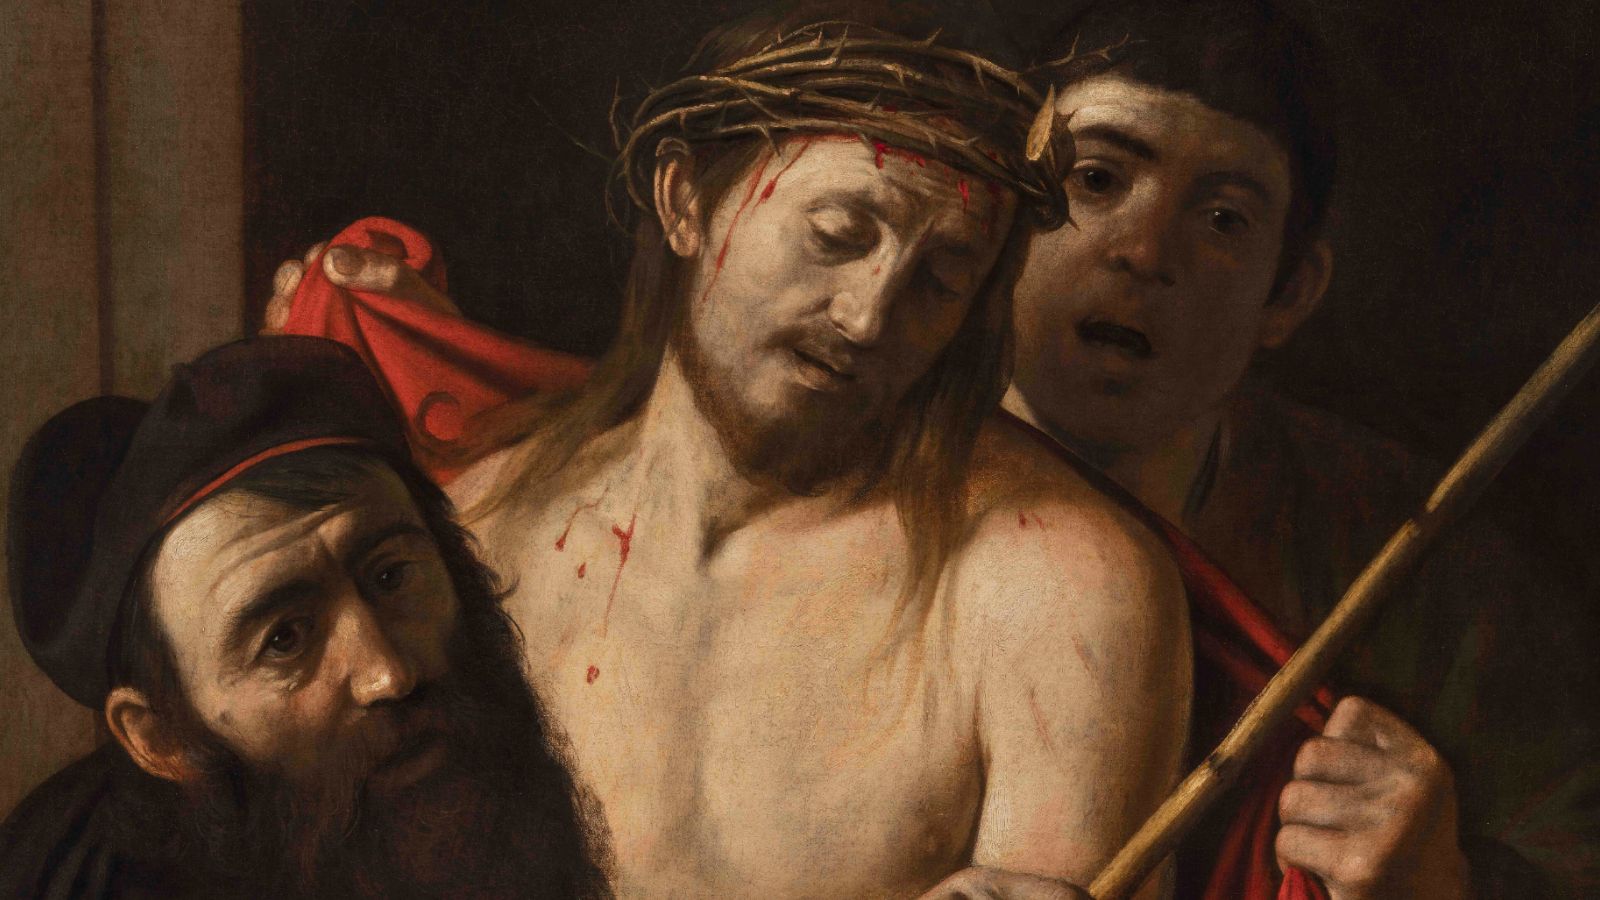 Lost Caravaggio painting confirmed in Spain